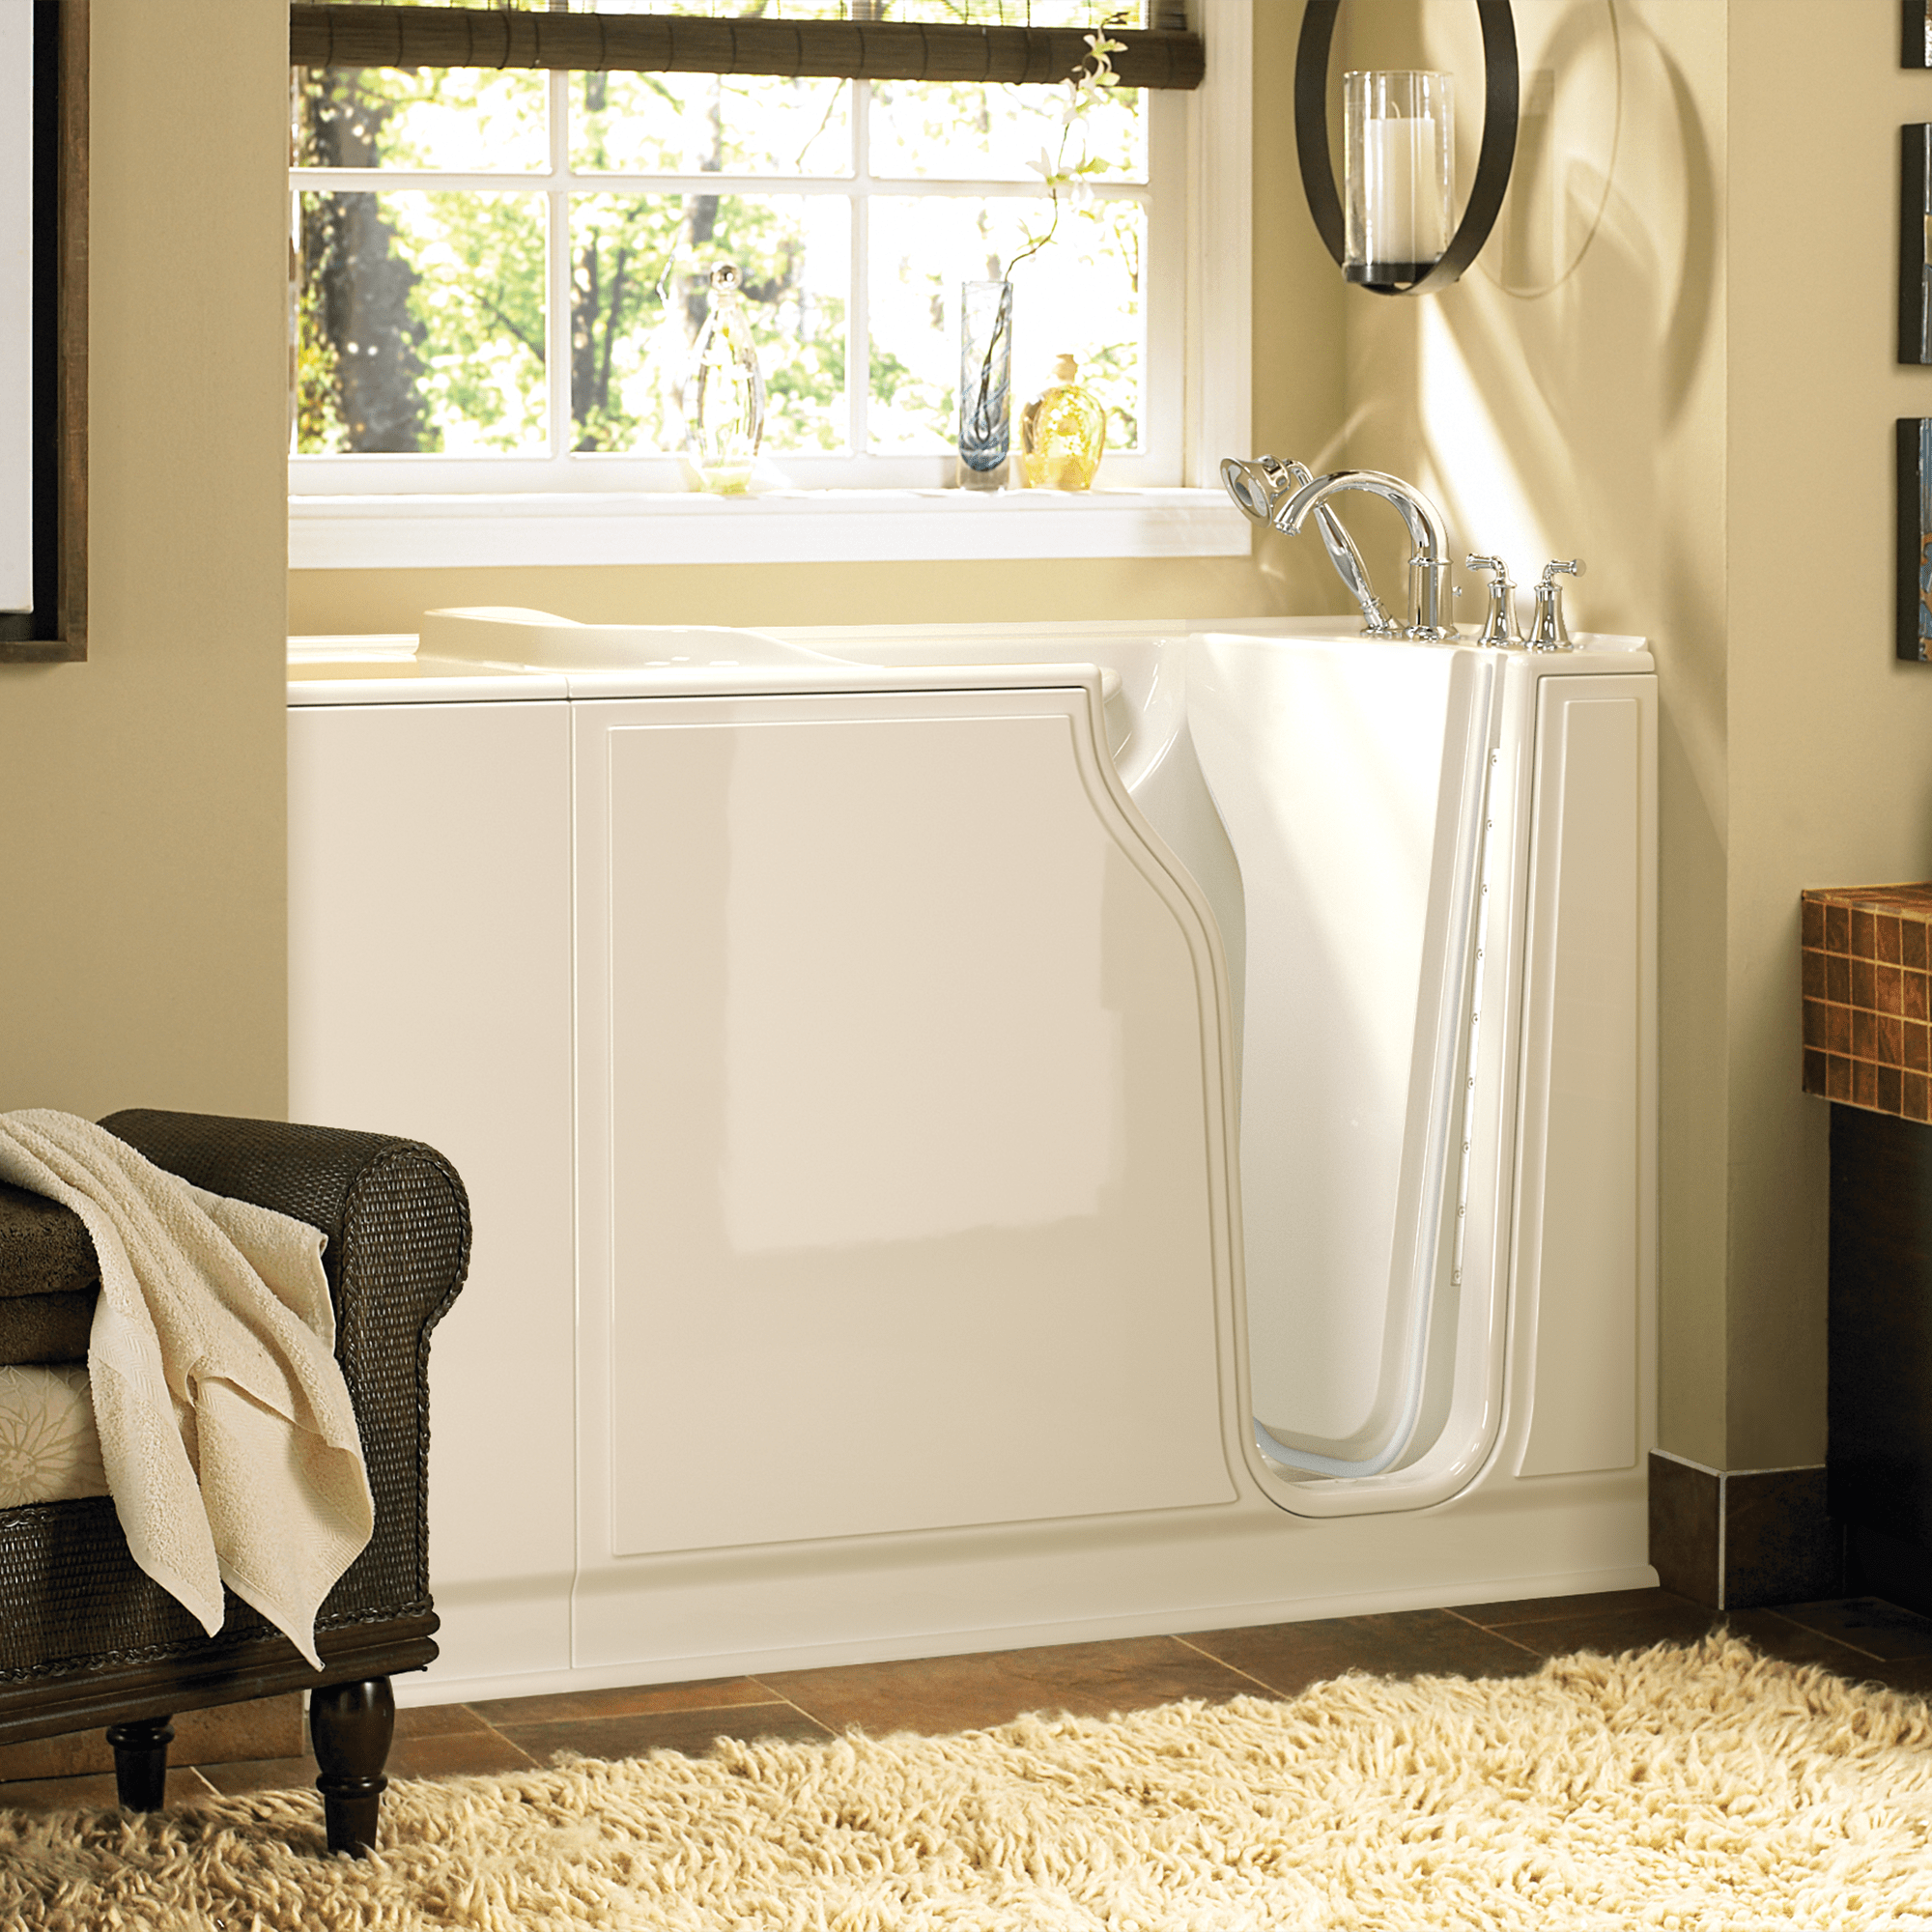 Gelcoat Value Series 30 x 52 -Inch Walk-in Tub With Soaker System - Right-Hand Drain With Faucet